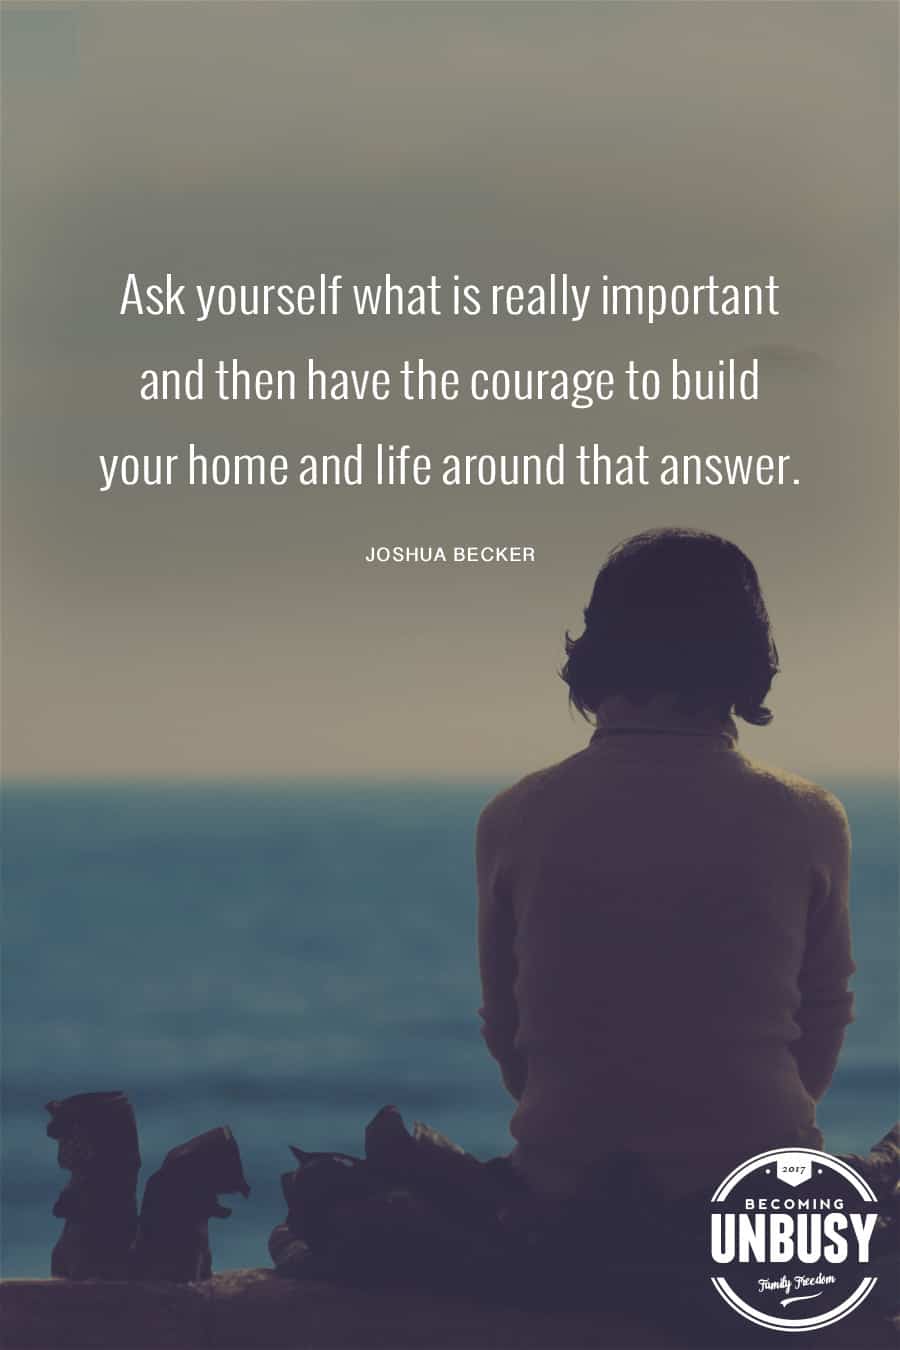 Ask yourself what is really important and then have the courage to build your home and life around that answer. — Joshua Becker #quote #minimalism #intentionalliving #becomingunbusy #joshuabecker *Loving this collection of quotes